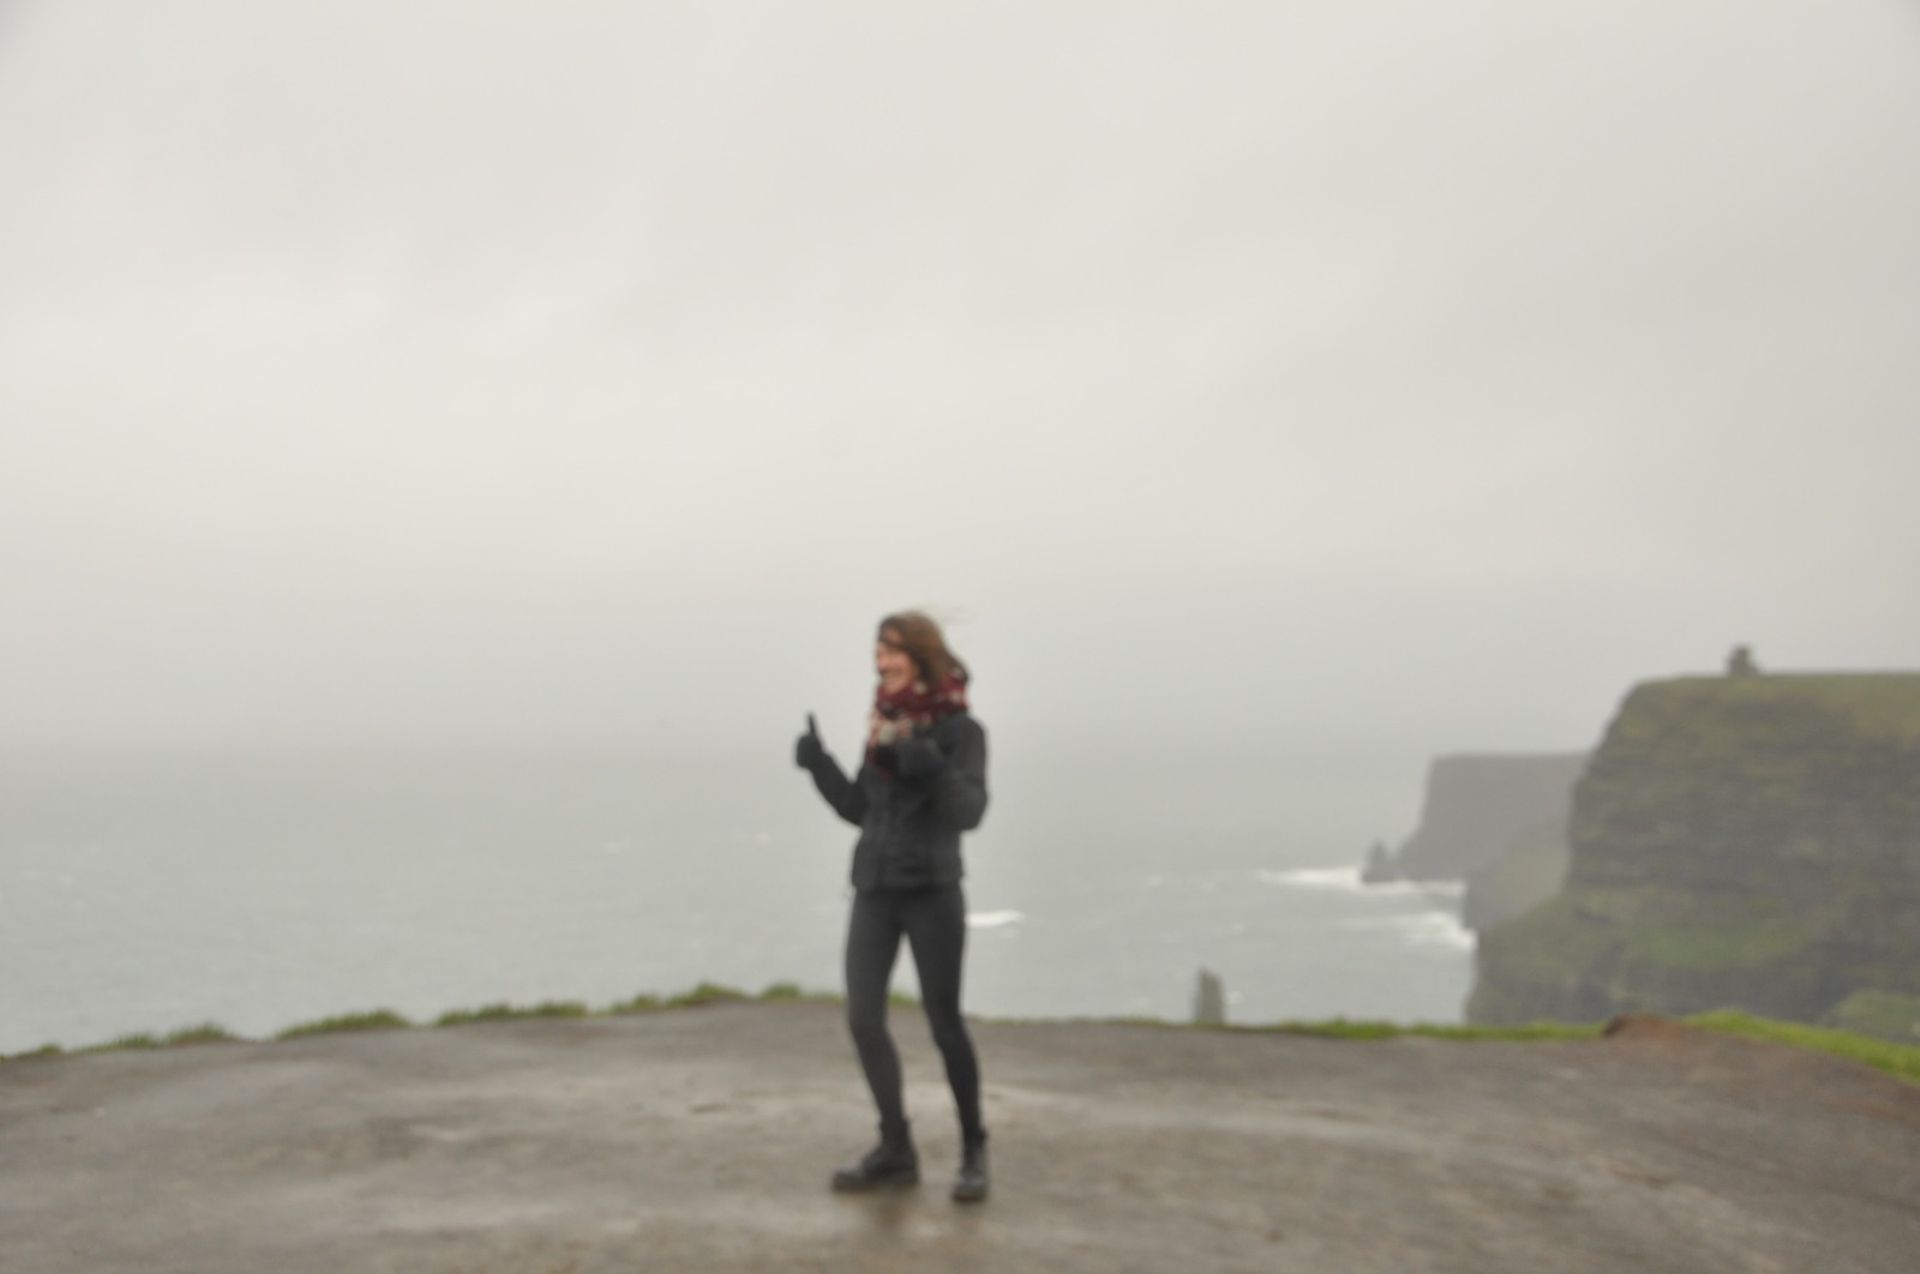 Cliffs of Moher 3/3 - very windy